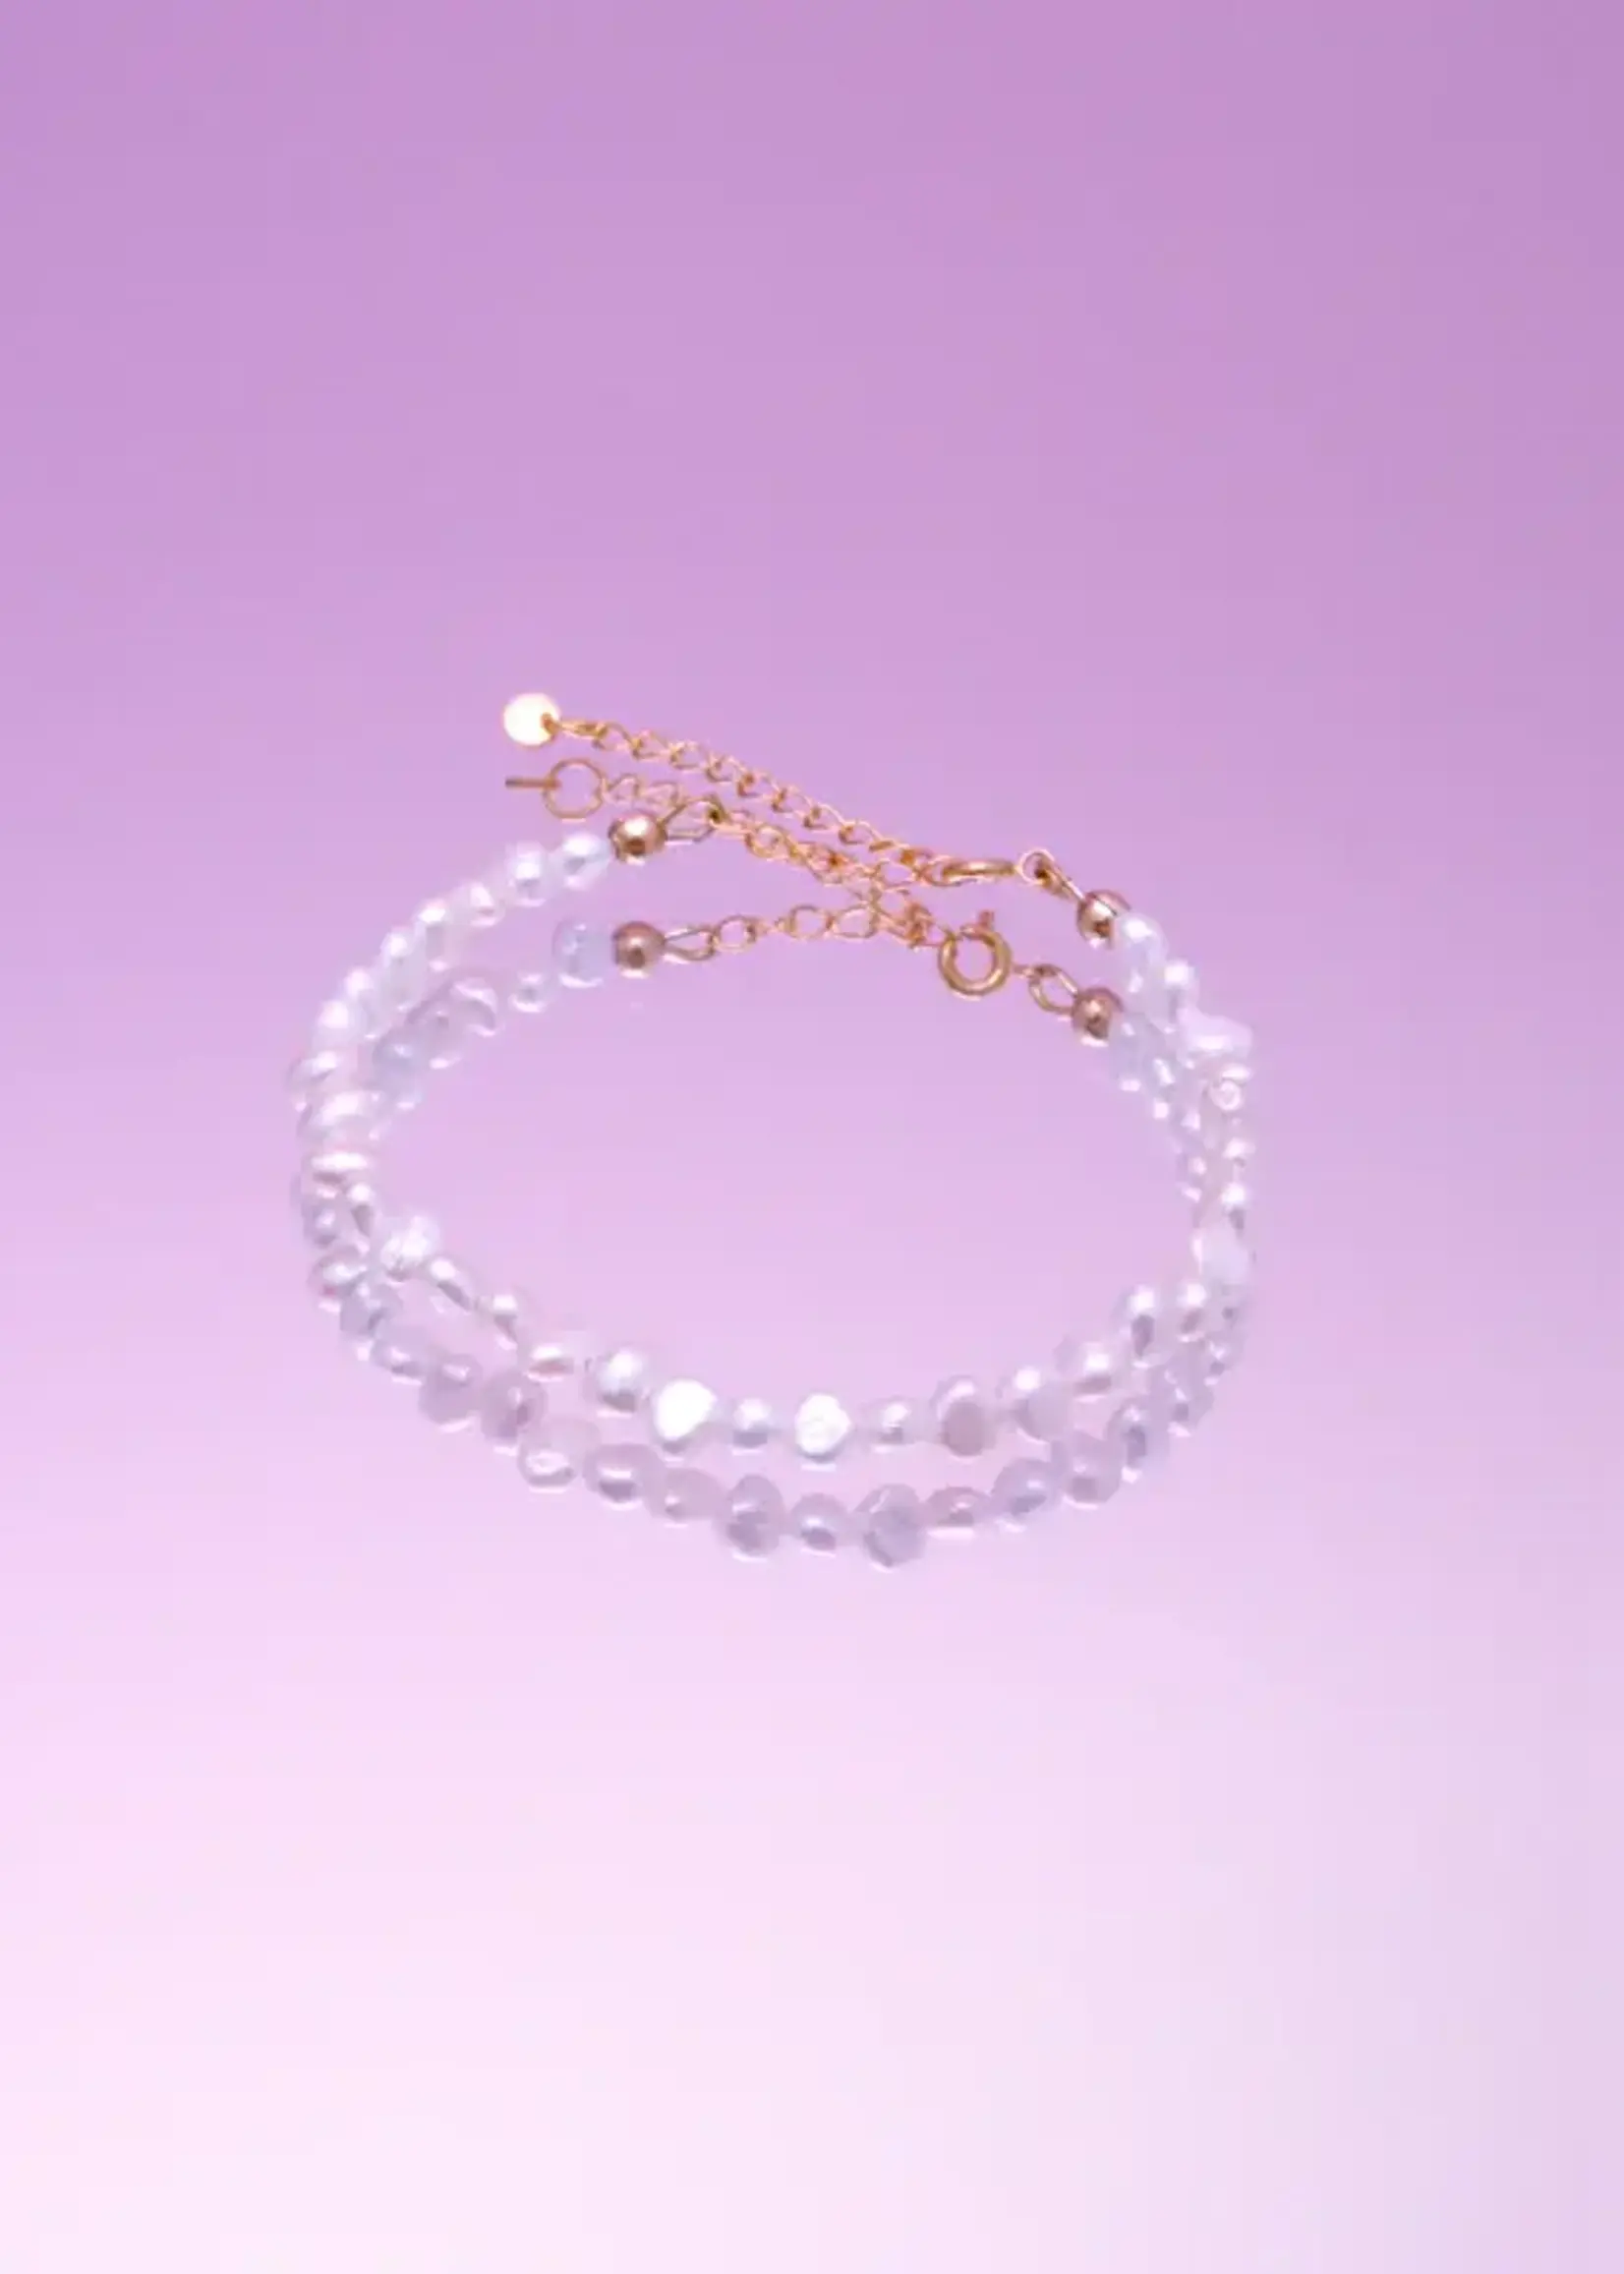 Atelier Jean JEAN King of pearls armband